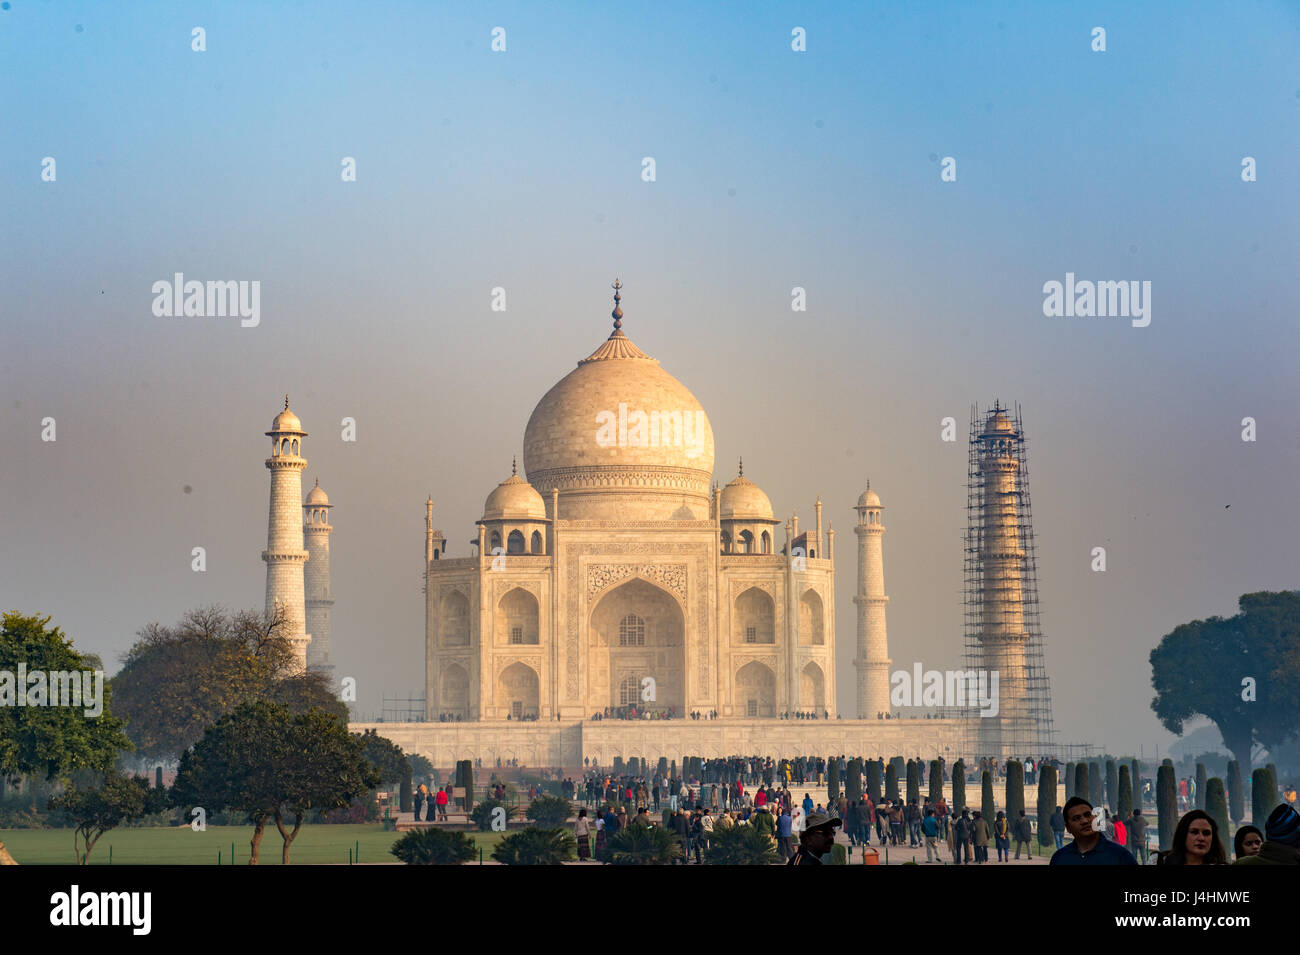 View of the Taj Mahal from inside the complex, located in Agra, India. Stock Photo